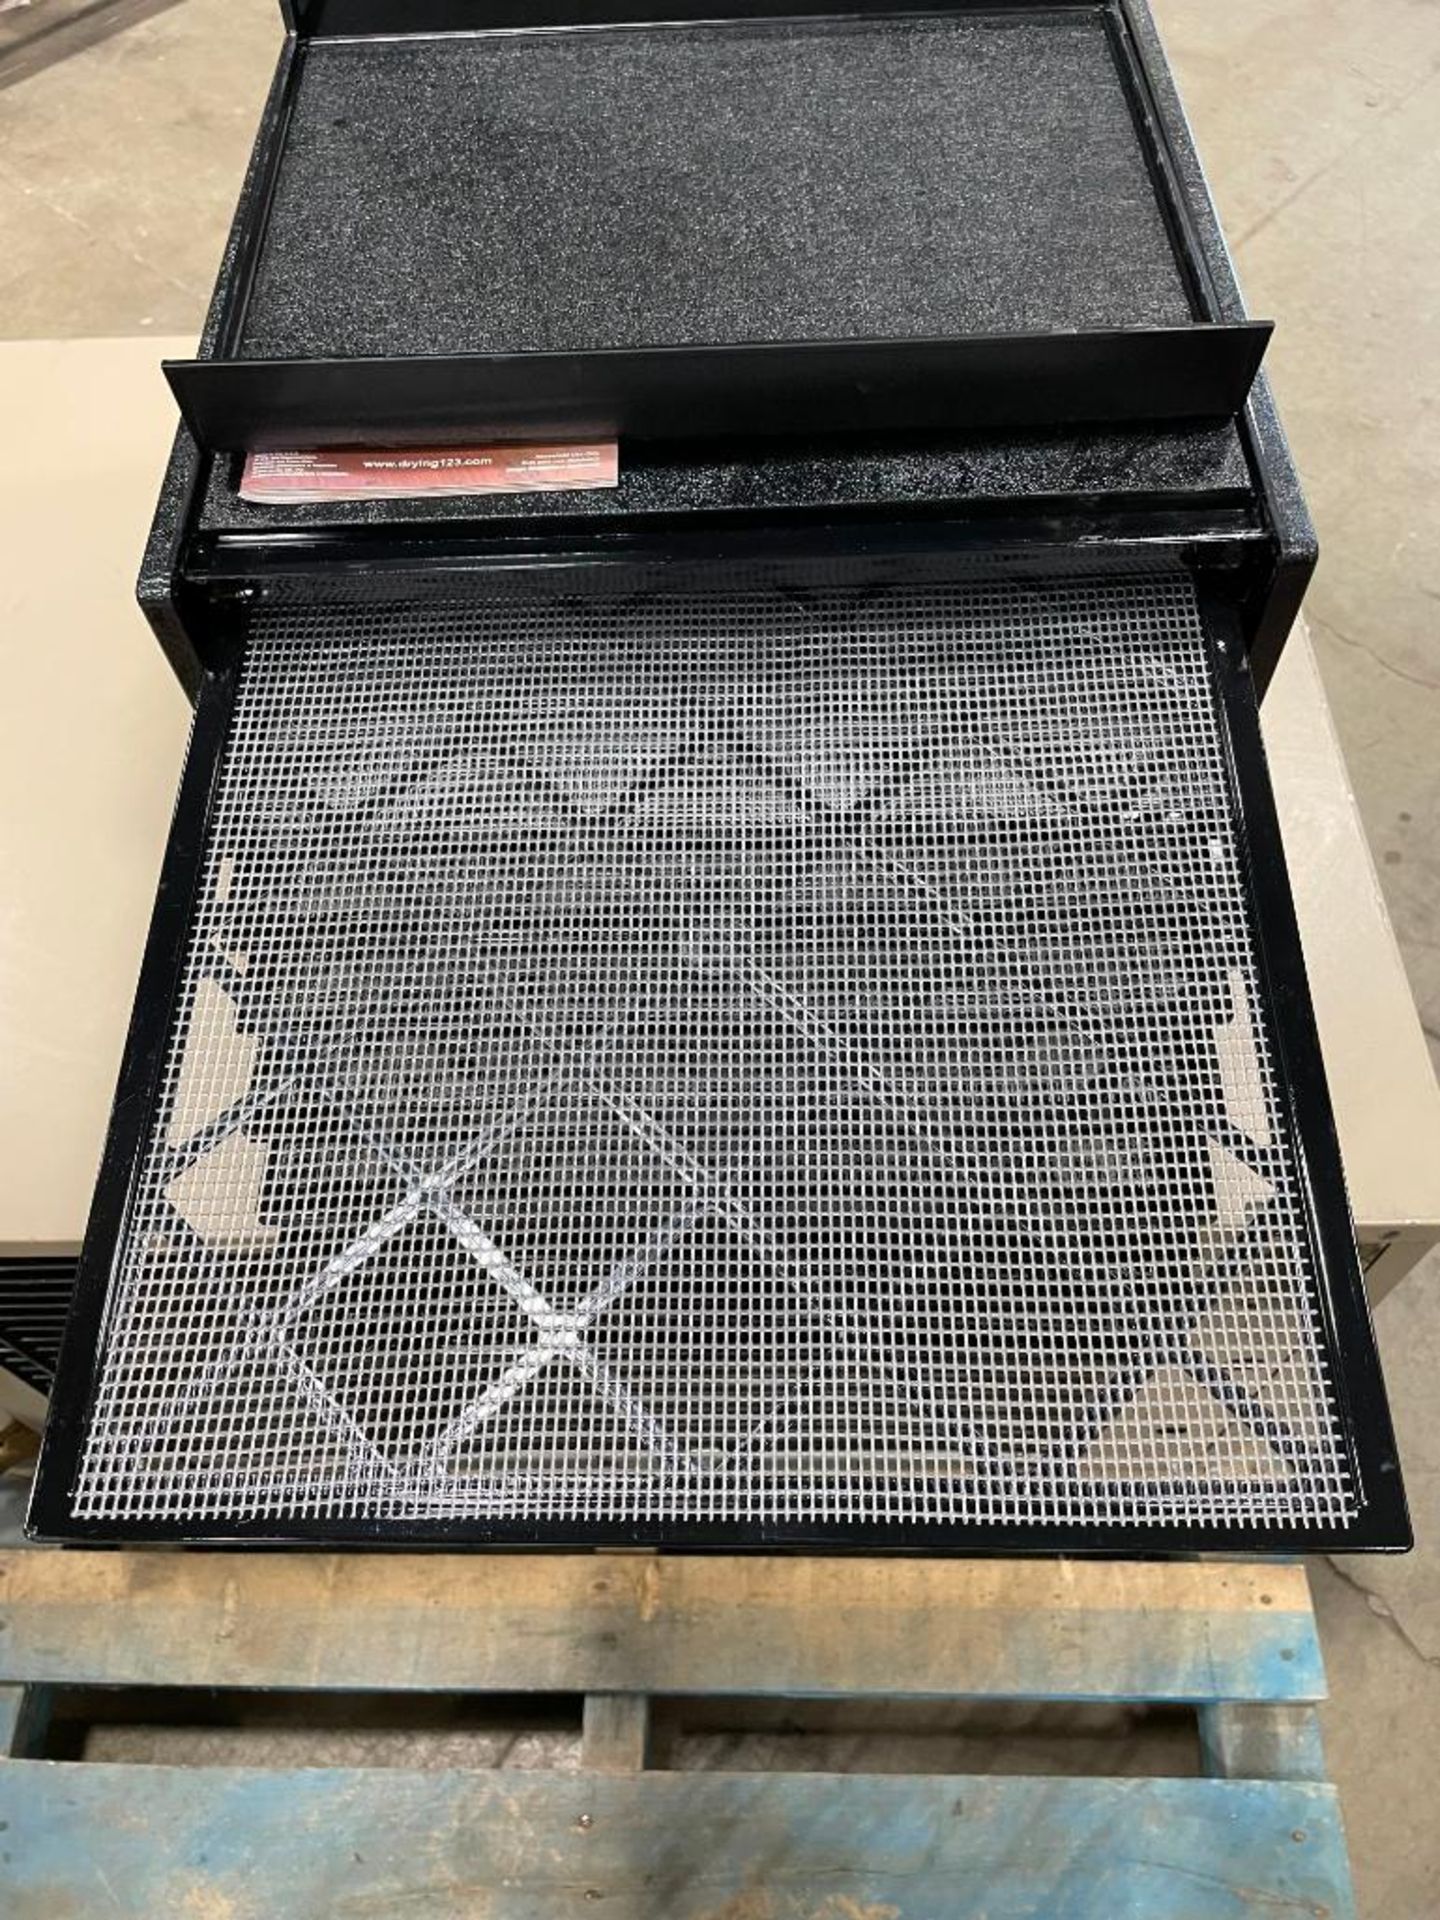 COMMERCIAL EXCALIBUR DEHYDRATOR - Image 12 of 14